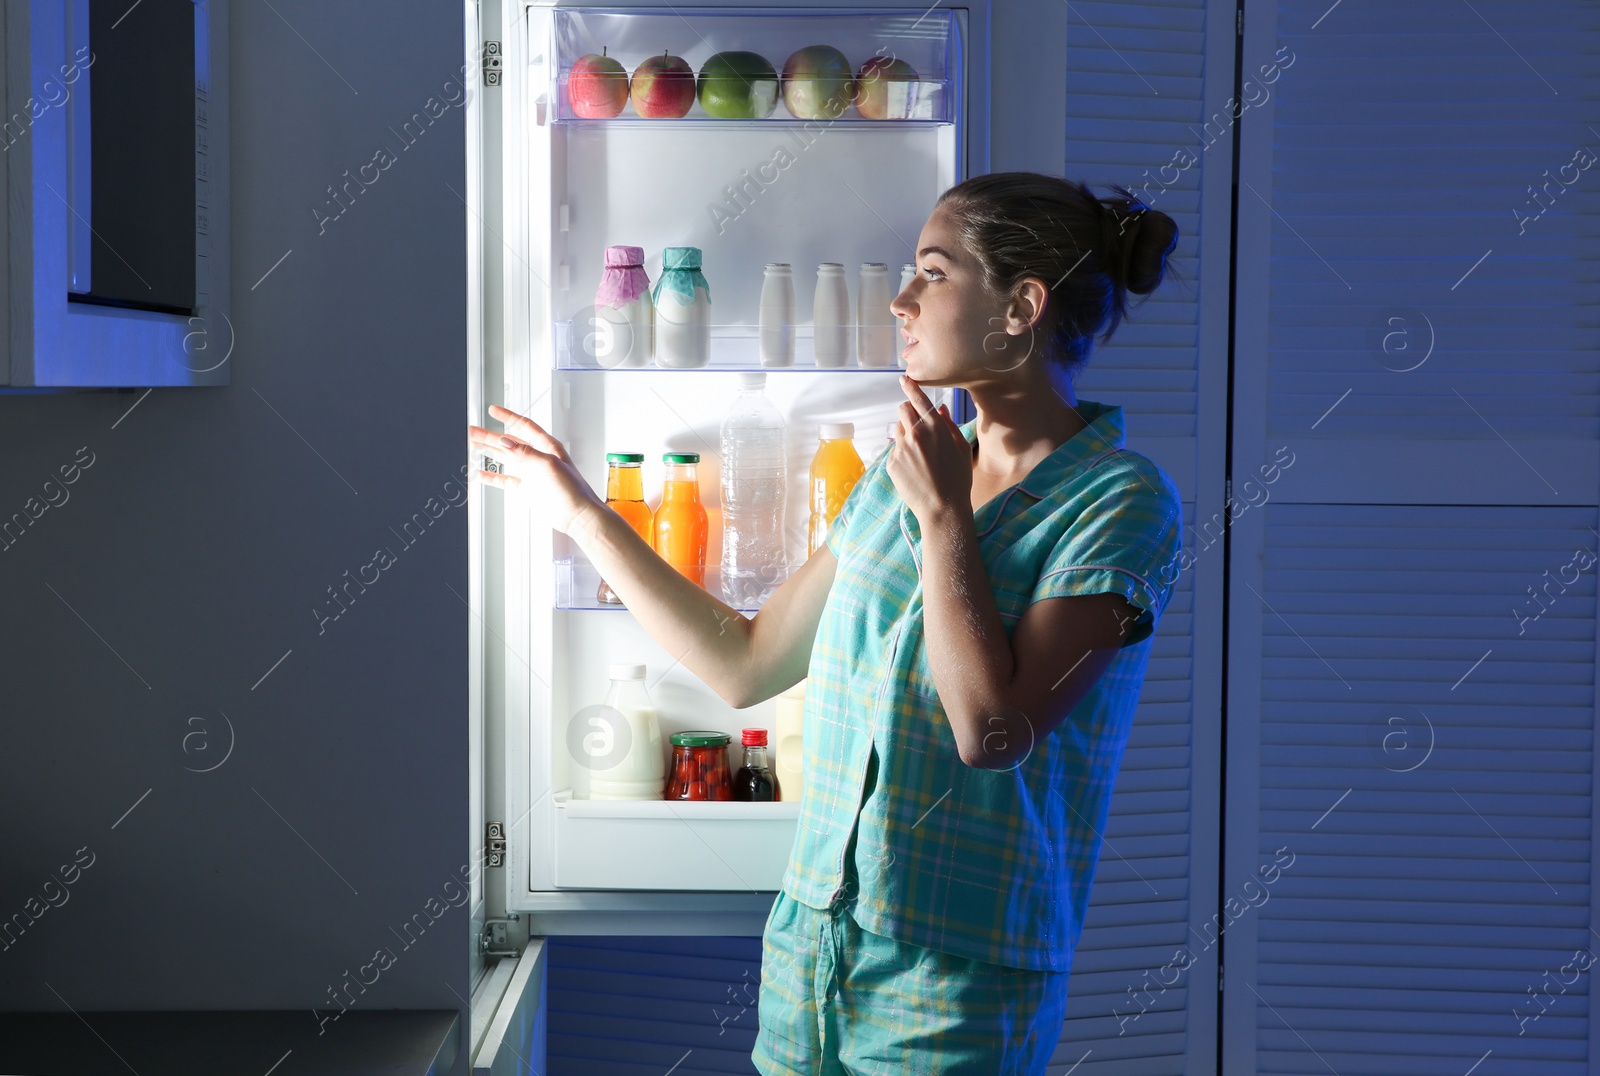 Photo of Woman choosing food from refrigerator in kitchen at night